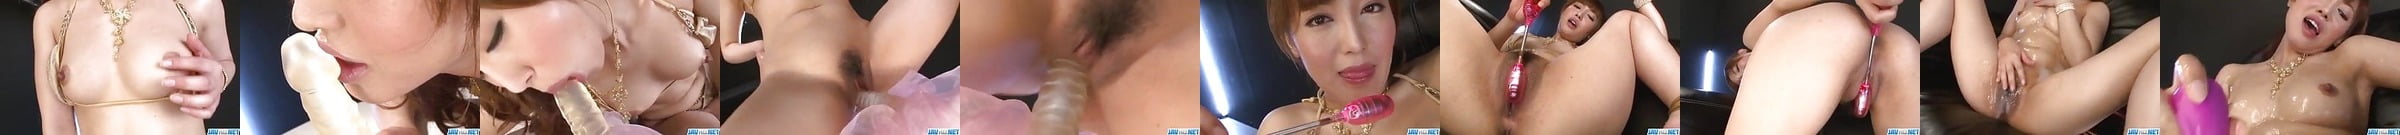 Yui Komine Provides Amazing Solo In Harsh Manners Porn 2a Jp